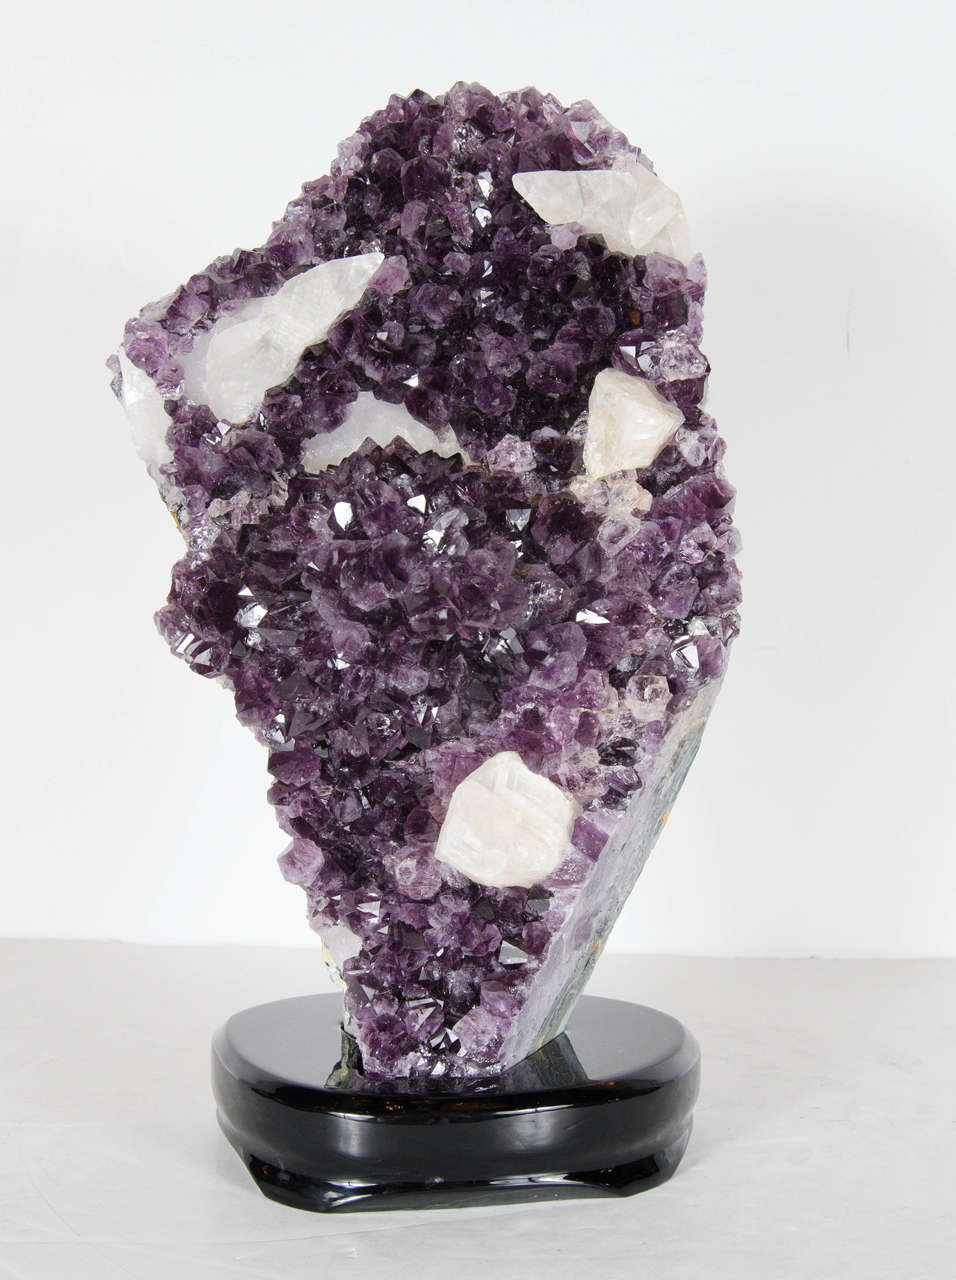 This majestic rock specimen features vibrant and rich Amethyst and with inset White Quartz specimens as well. It is a one of kind and rests on an ebonized walnut base. This geode would look luxurious in any room or decor.